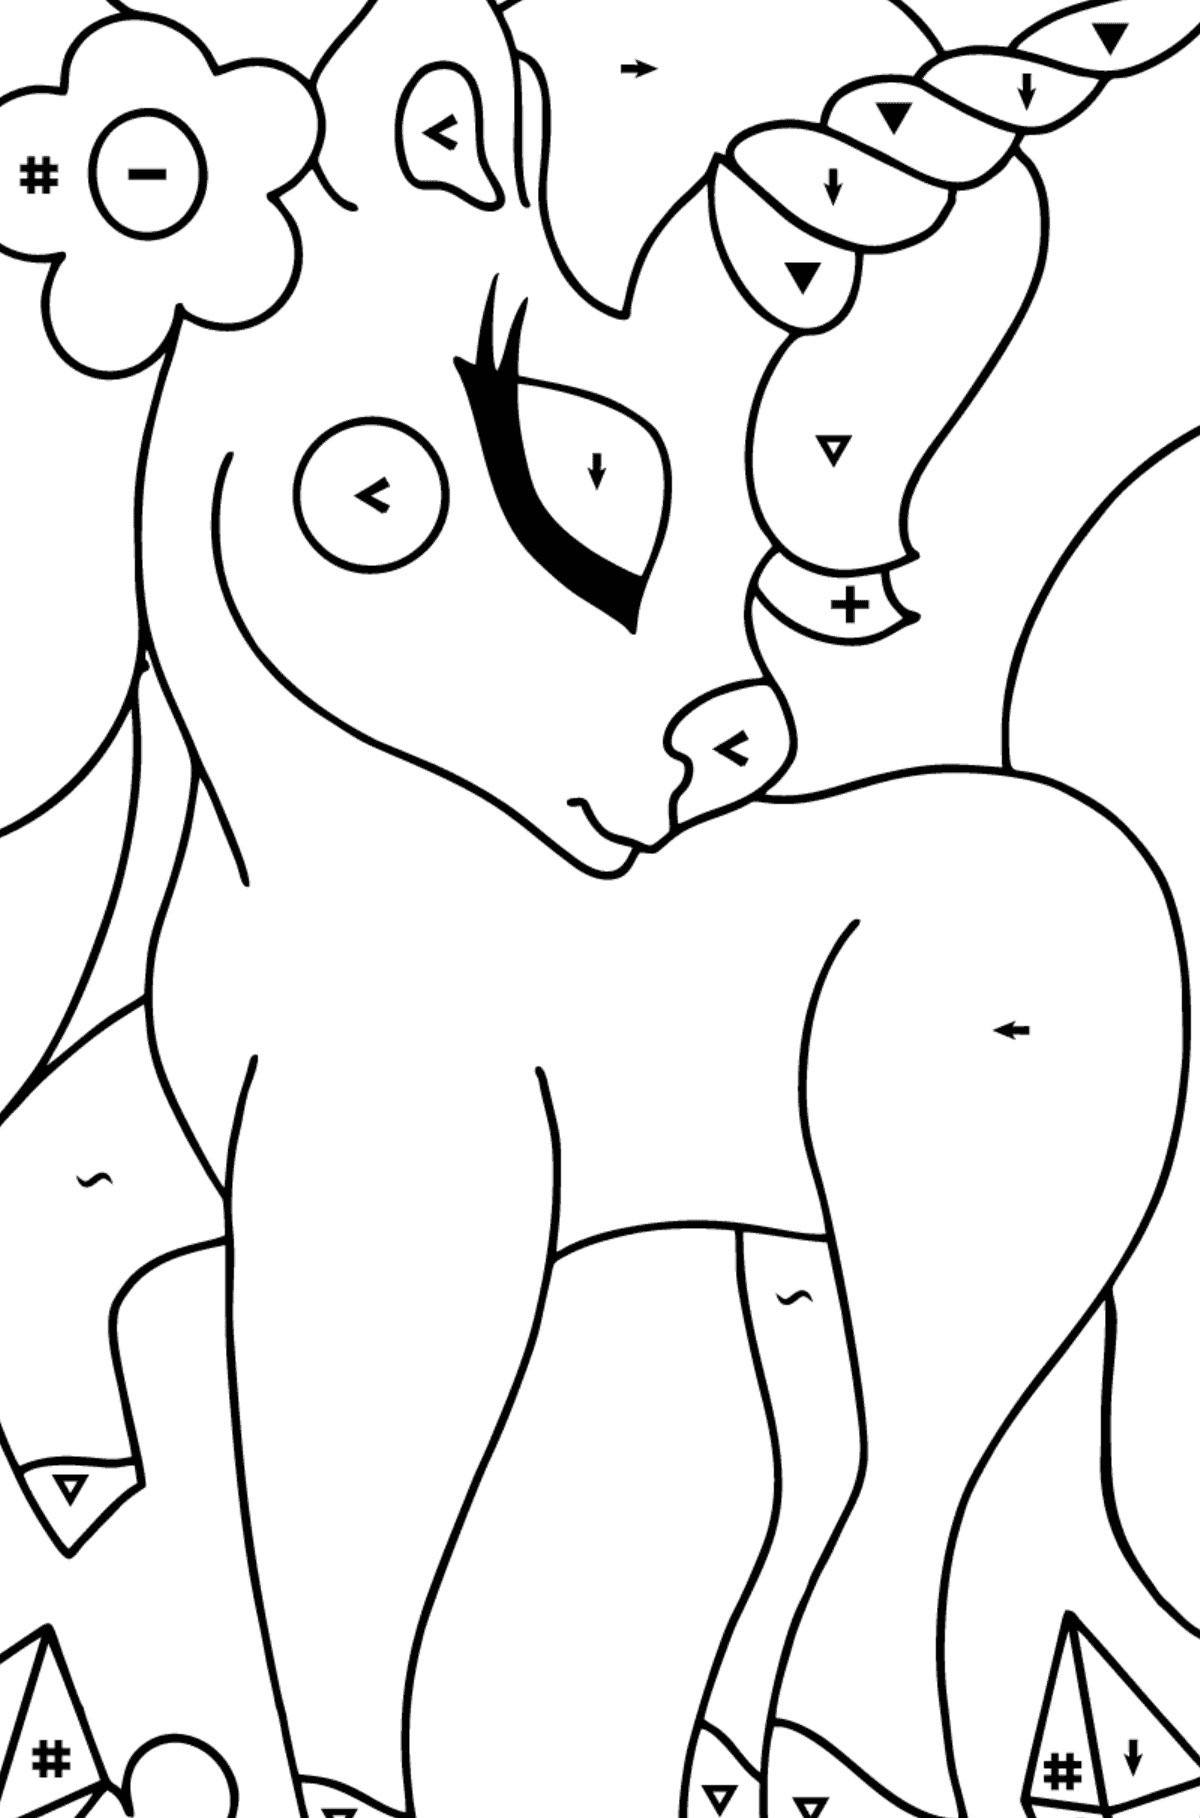 Charming Unicorn Coloring Page - Coloring by Symbols for Kids